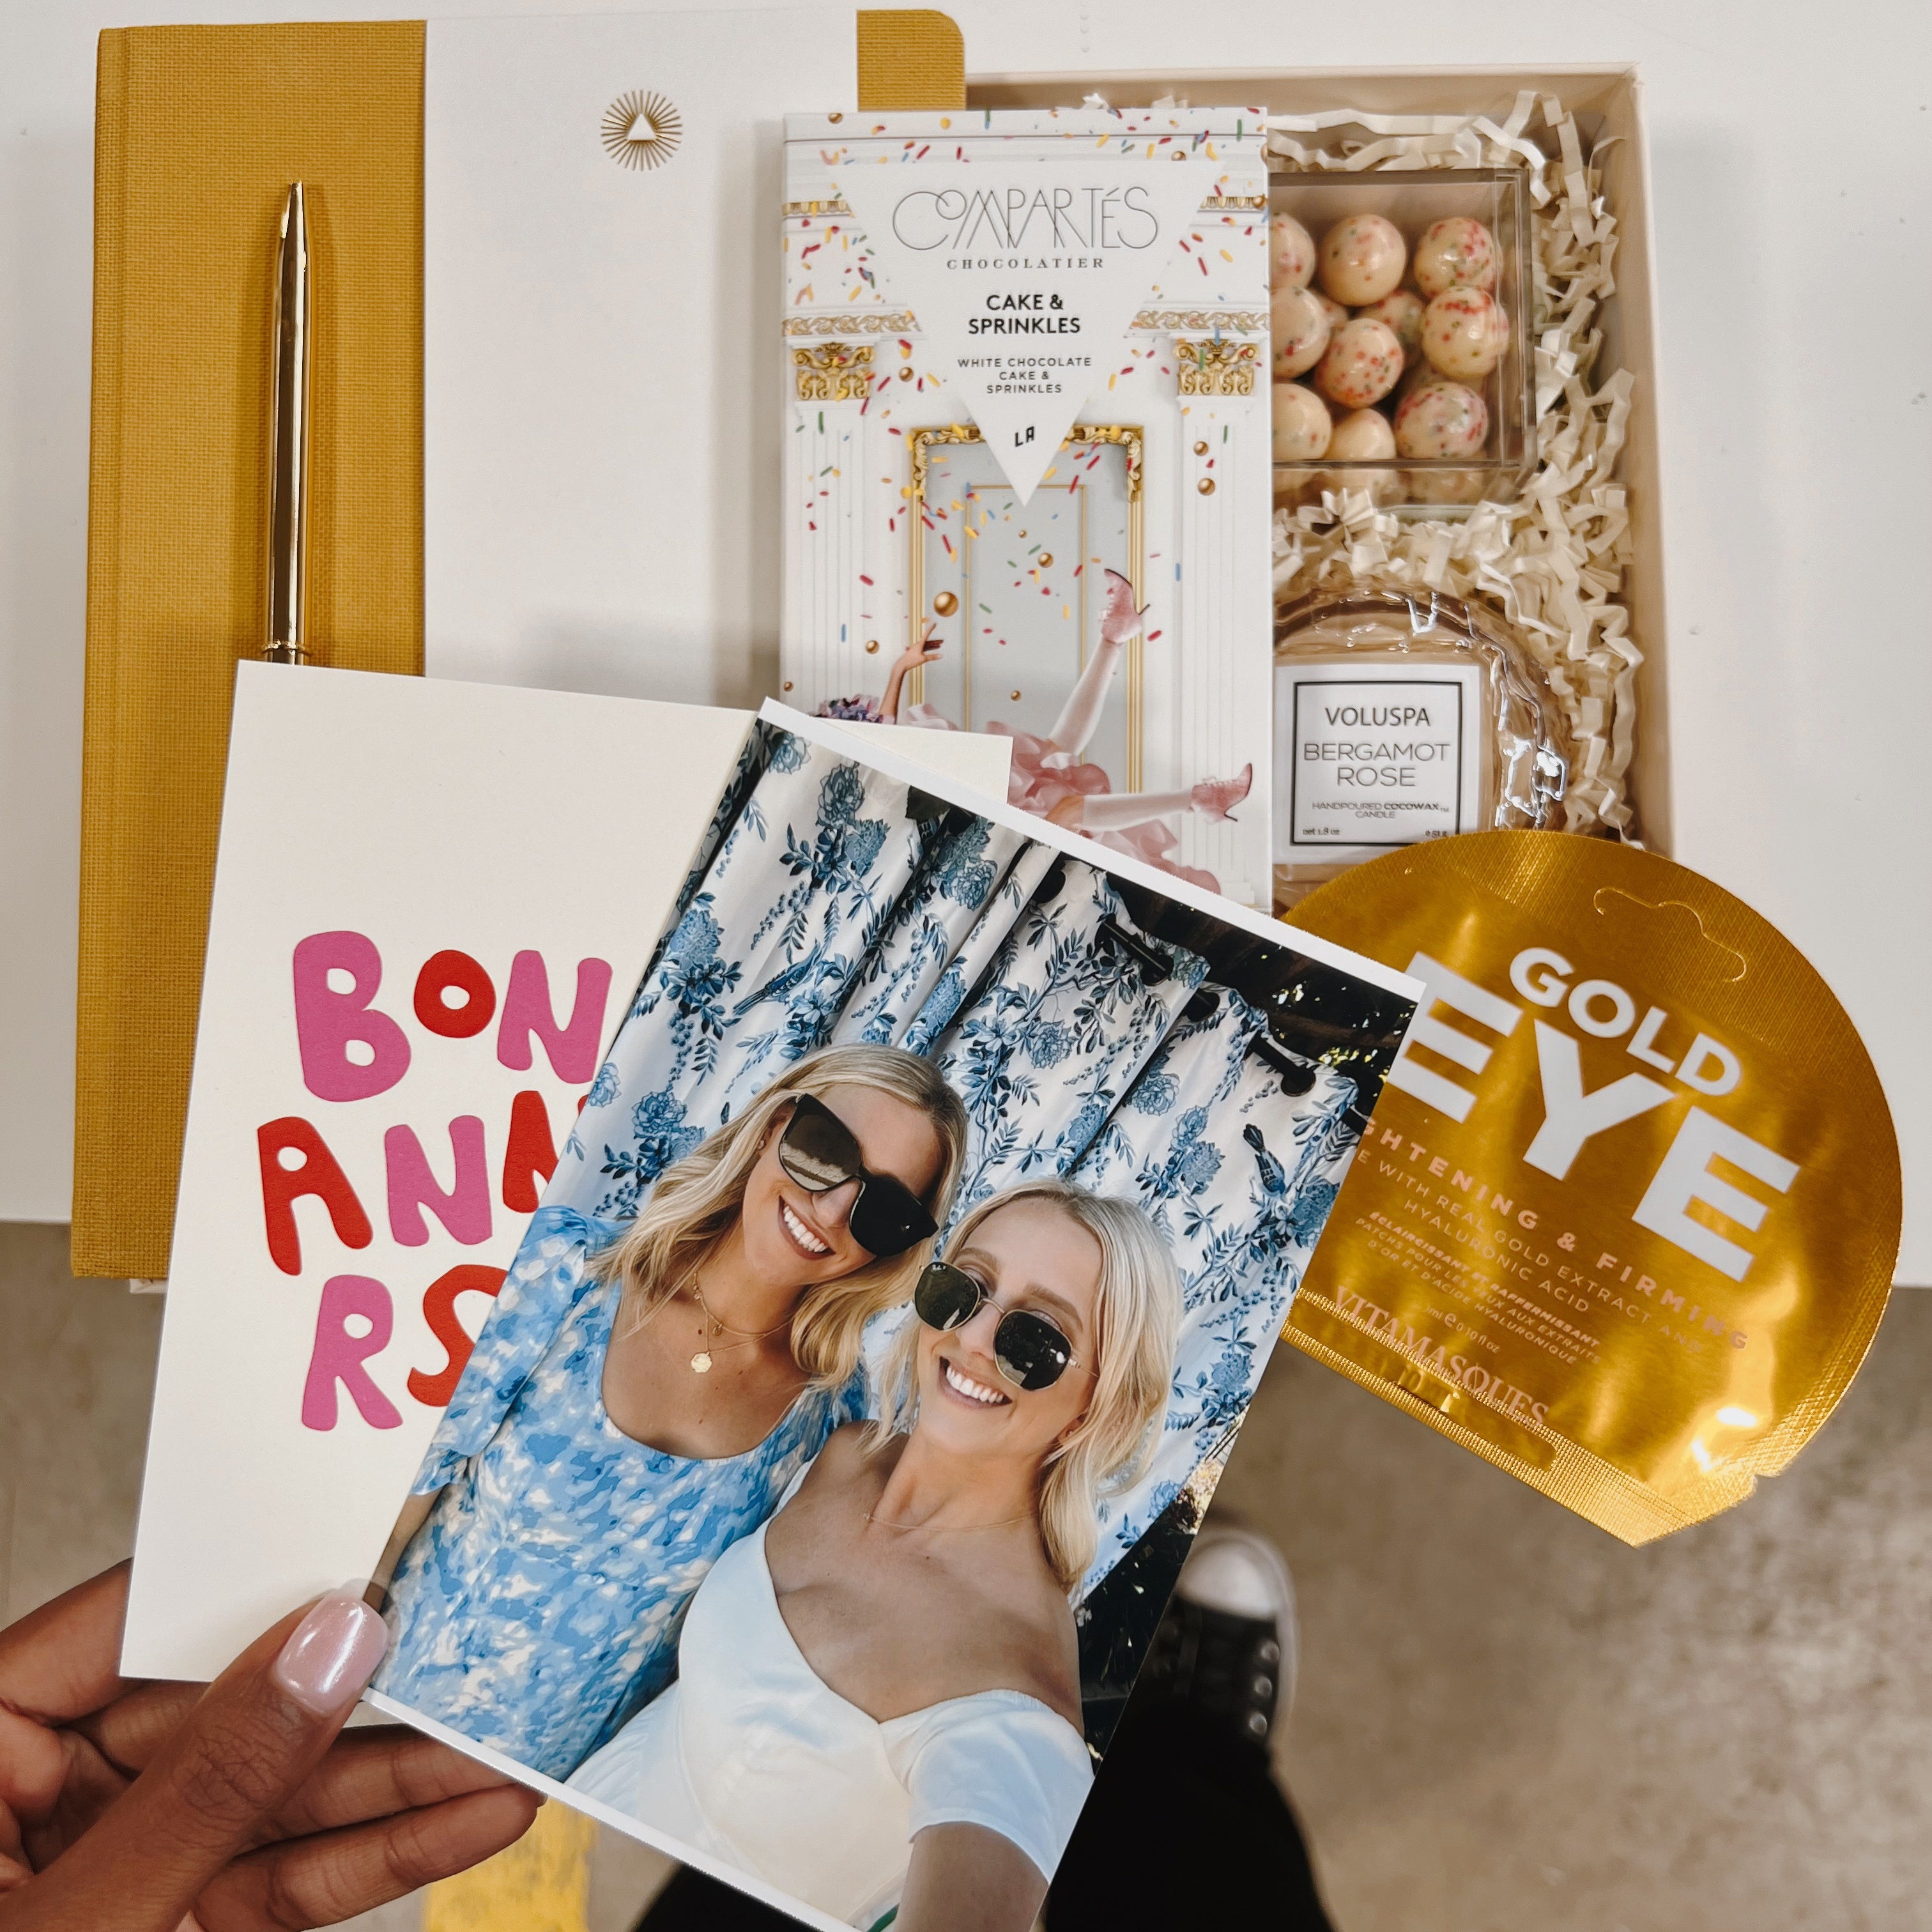 Birthday gift box with photo of two blonde girls and other card held in hand over gift box